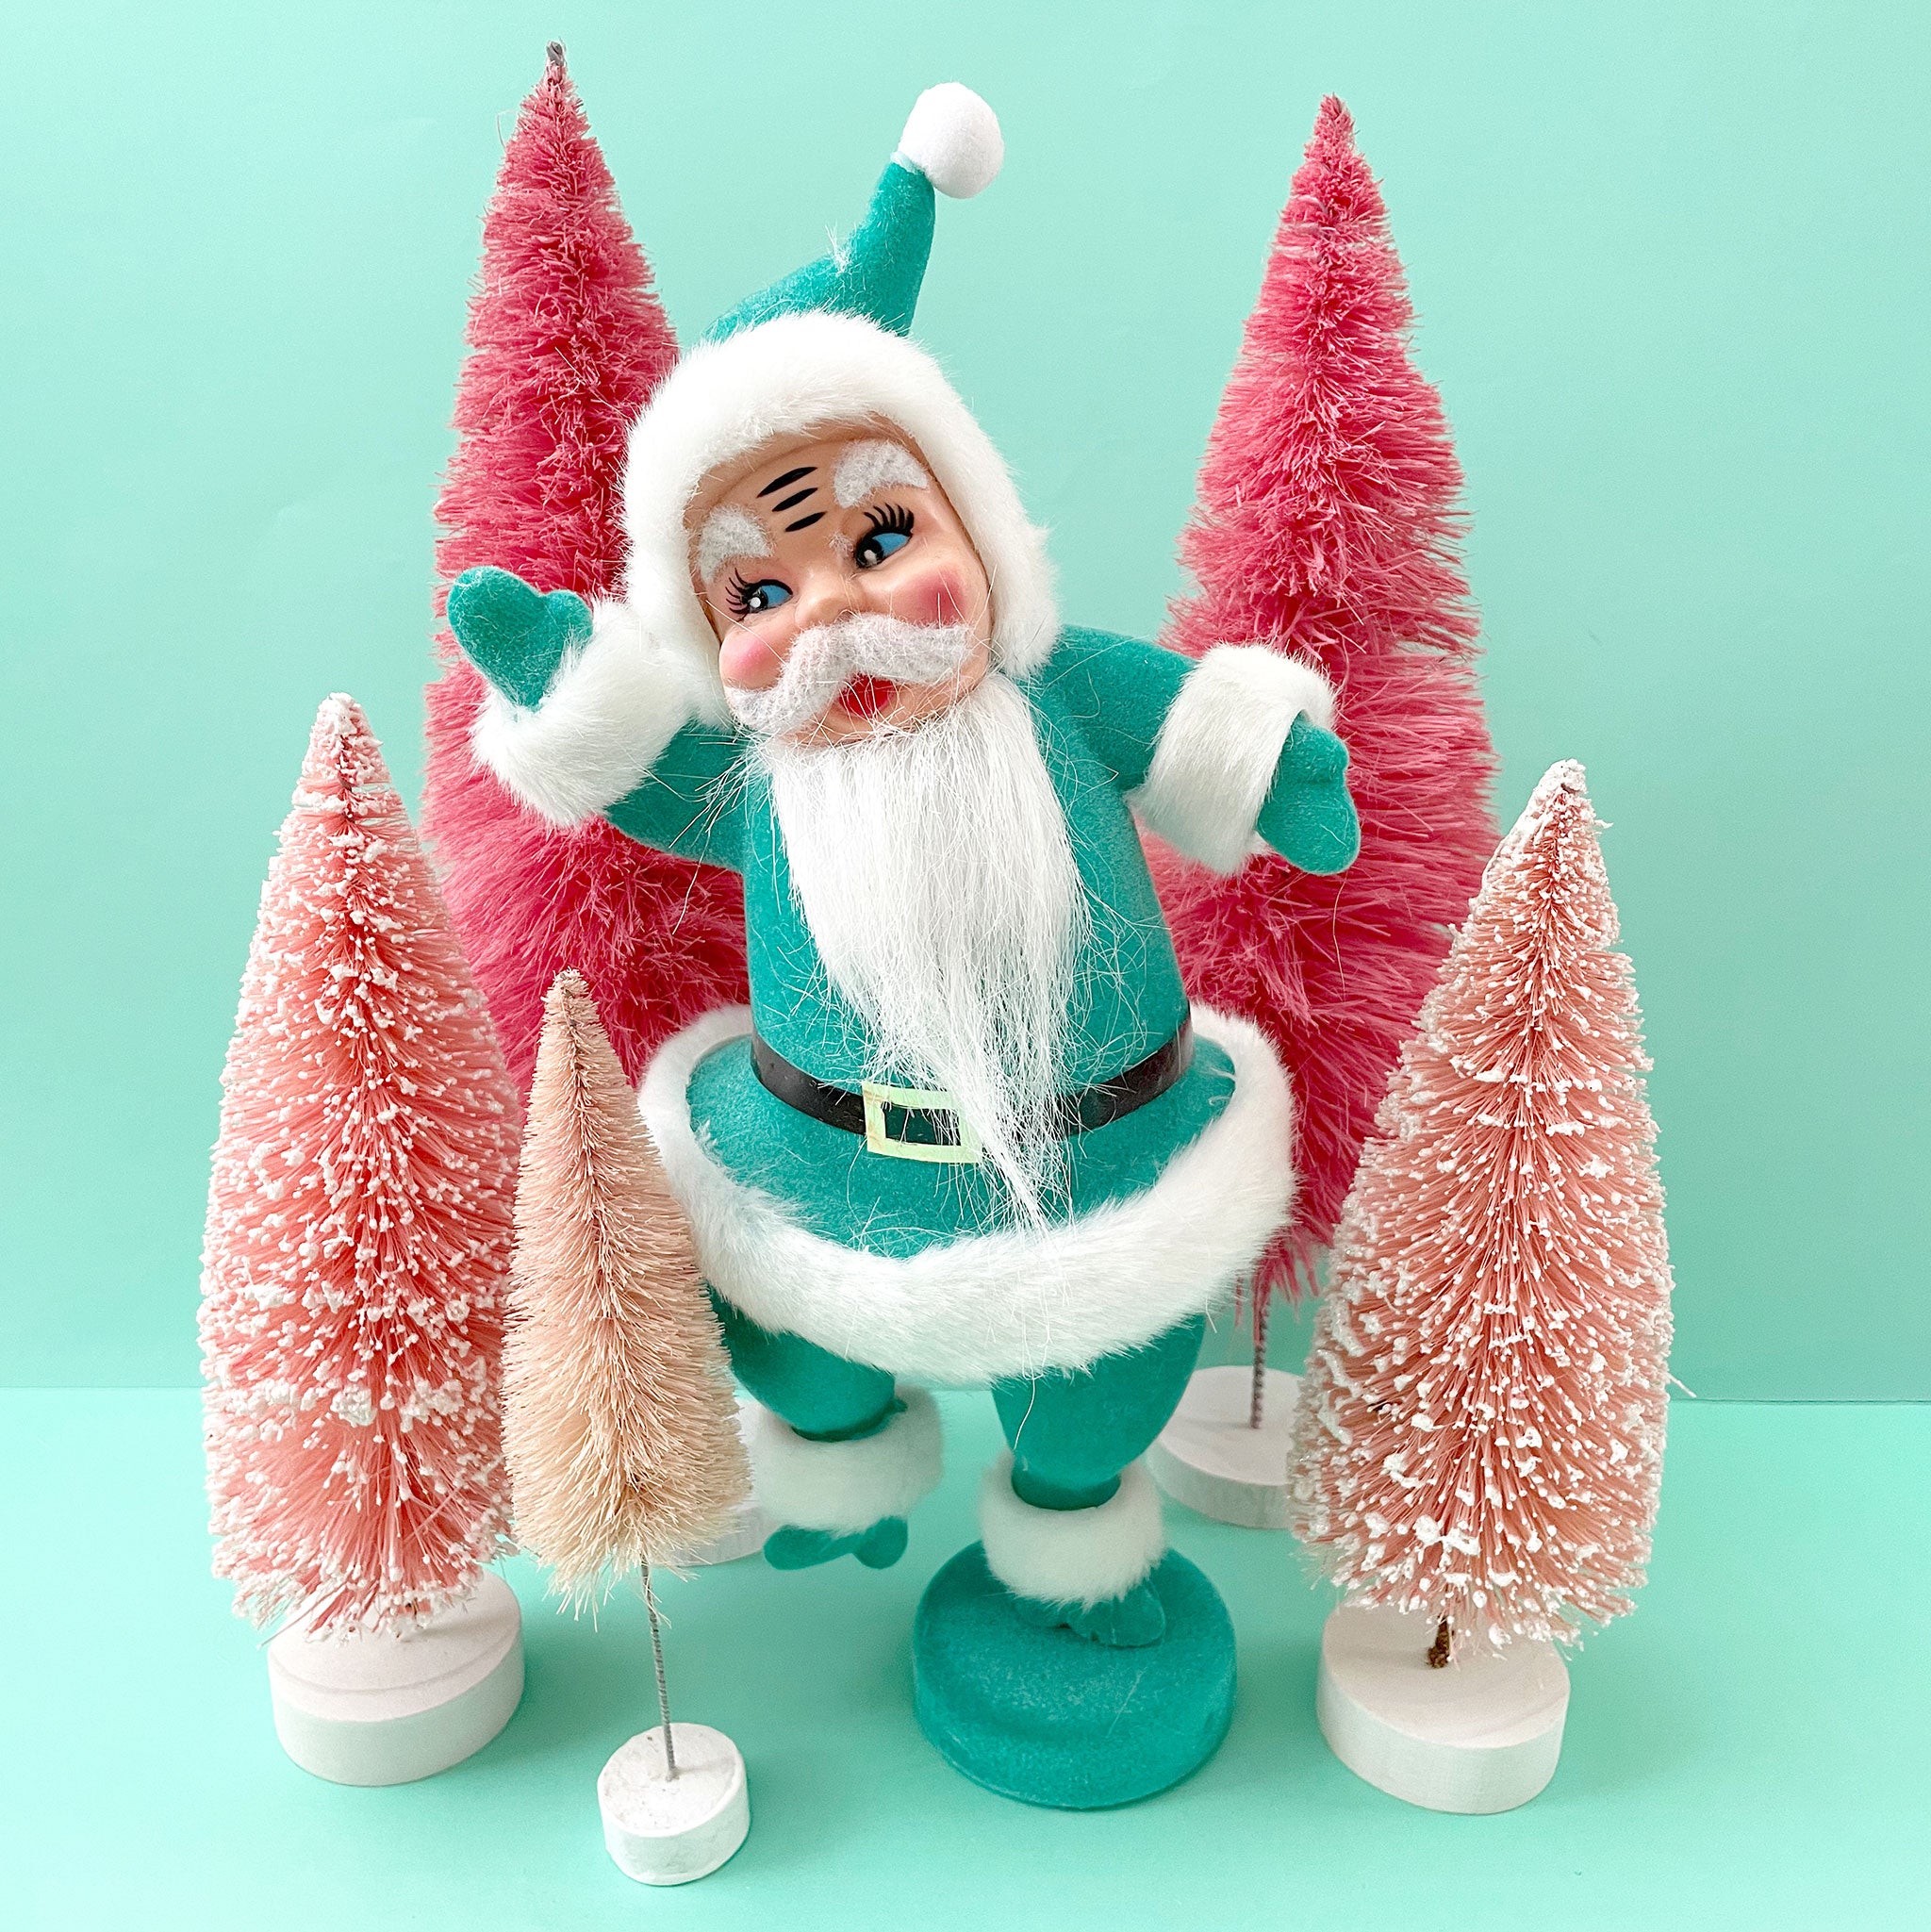 A plastic Santa figurine with a teal suit on with fuzzy cuffs and hat.